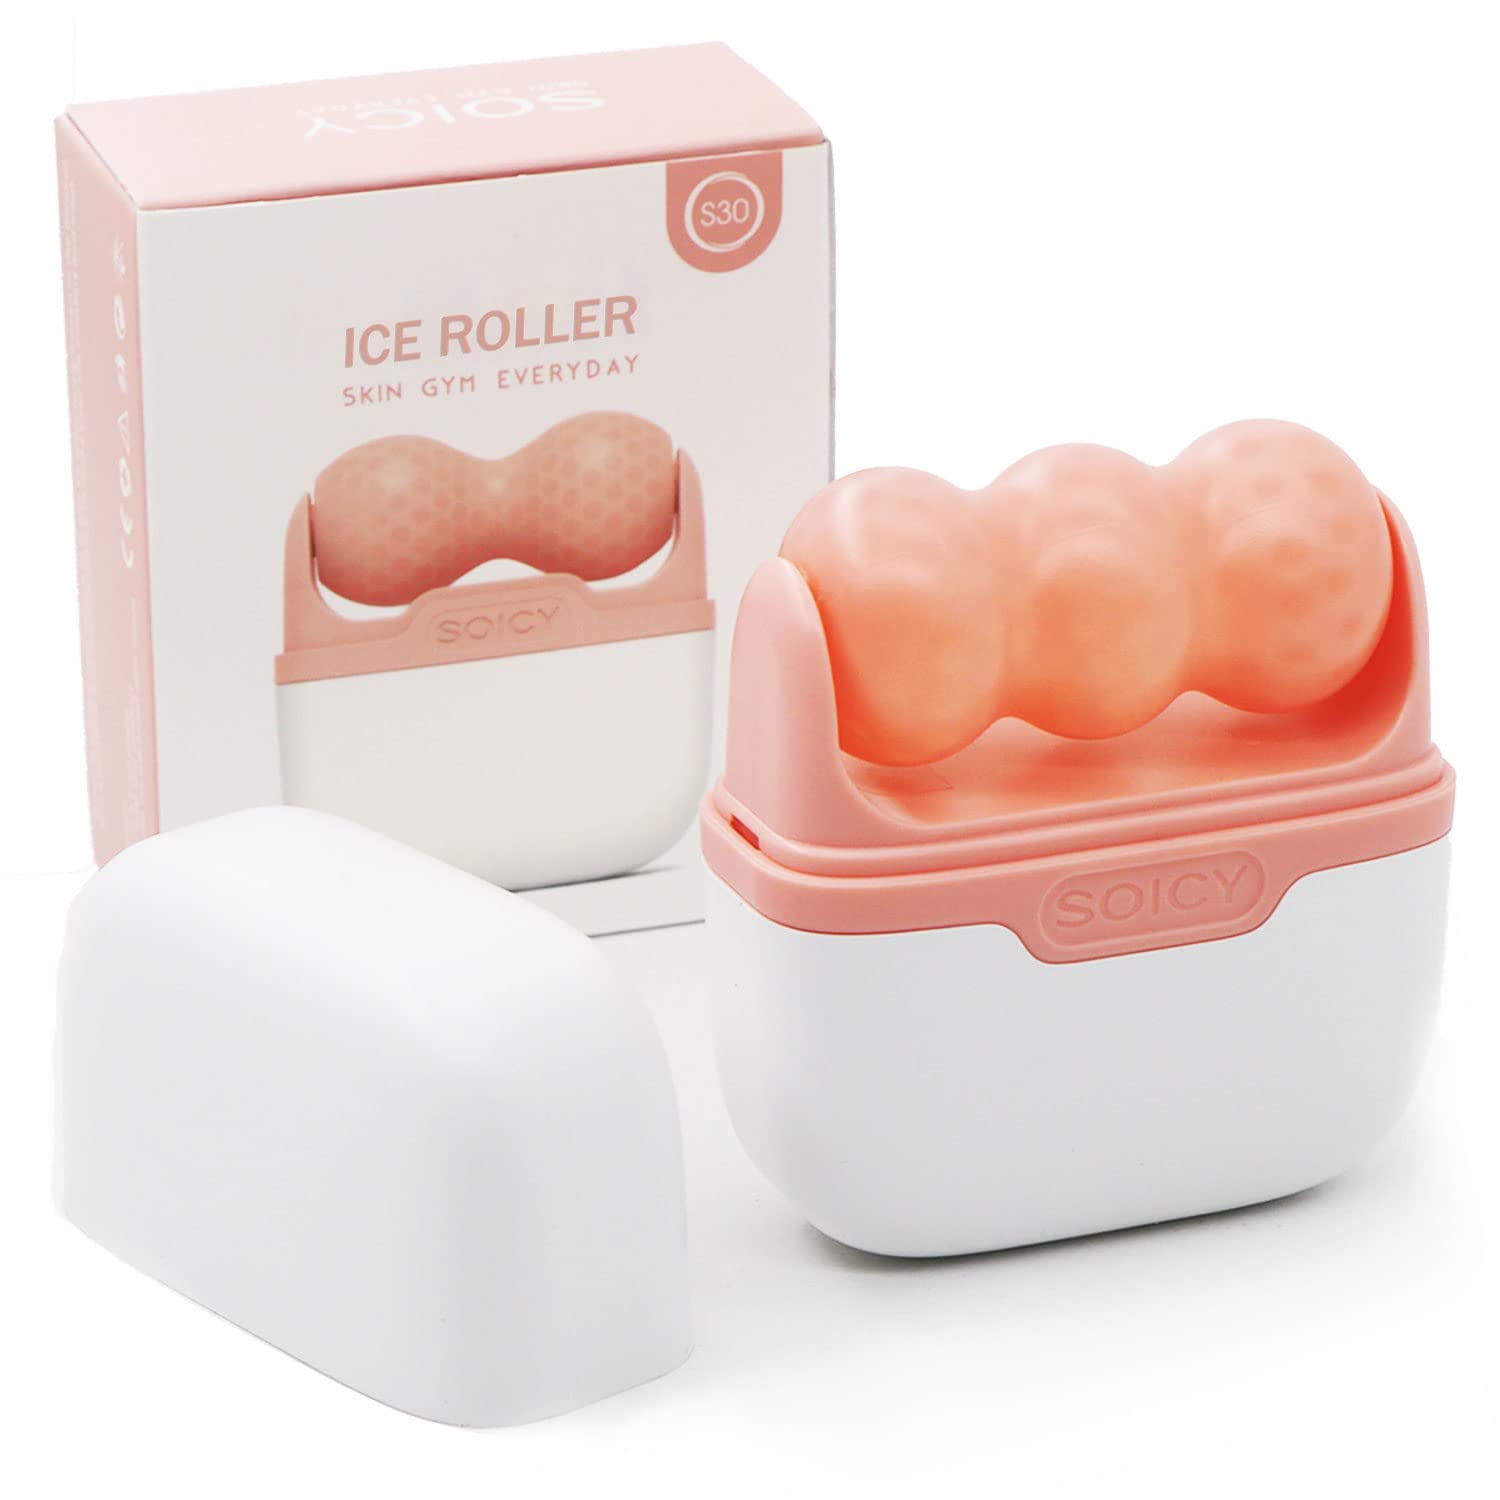 MARZAHAR Ice Roller, Ice Face Roller, Ice Roller for Face & Eye Puffiness  Relief